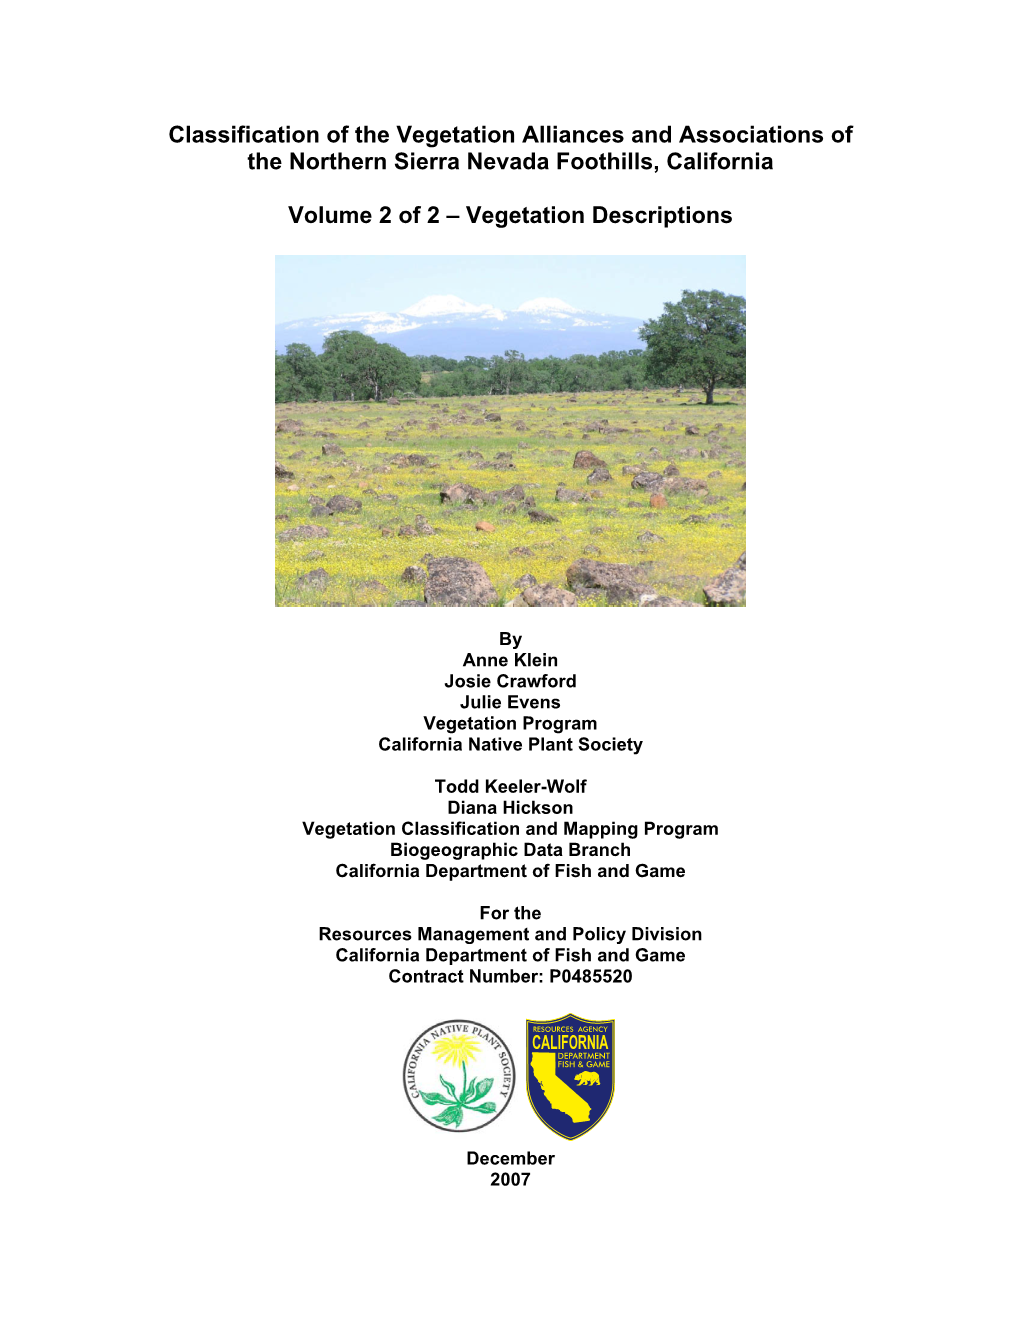 Classification of the Vegetation Alliances and Associations of the Northern Sierra Nevada Foothills, California Volume 2 of 2